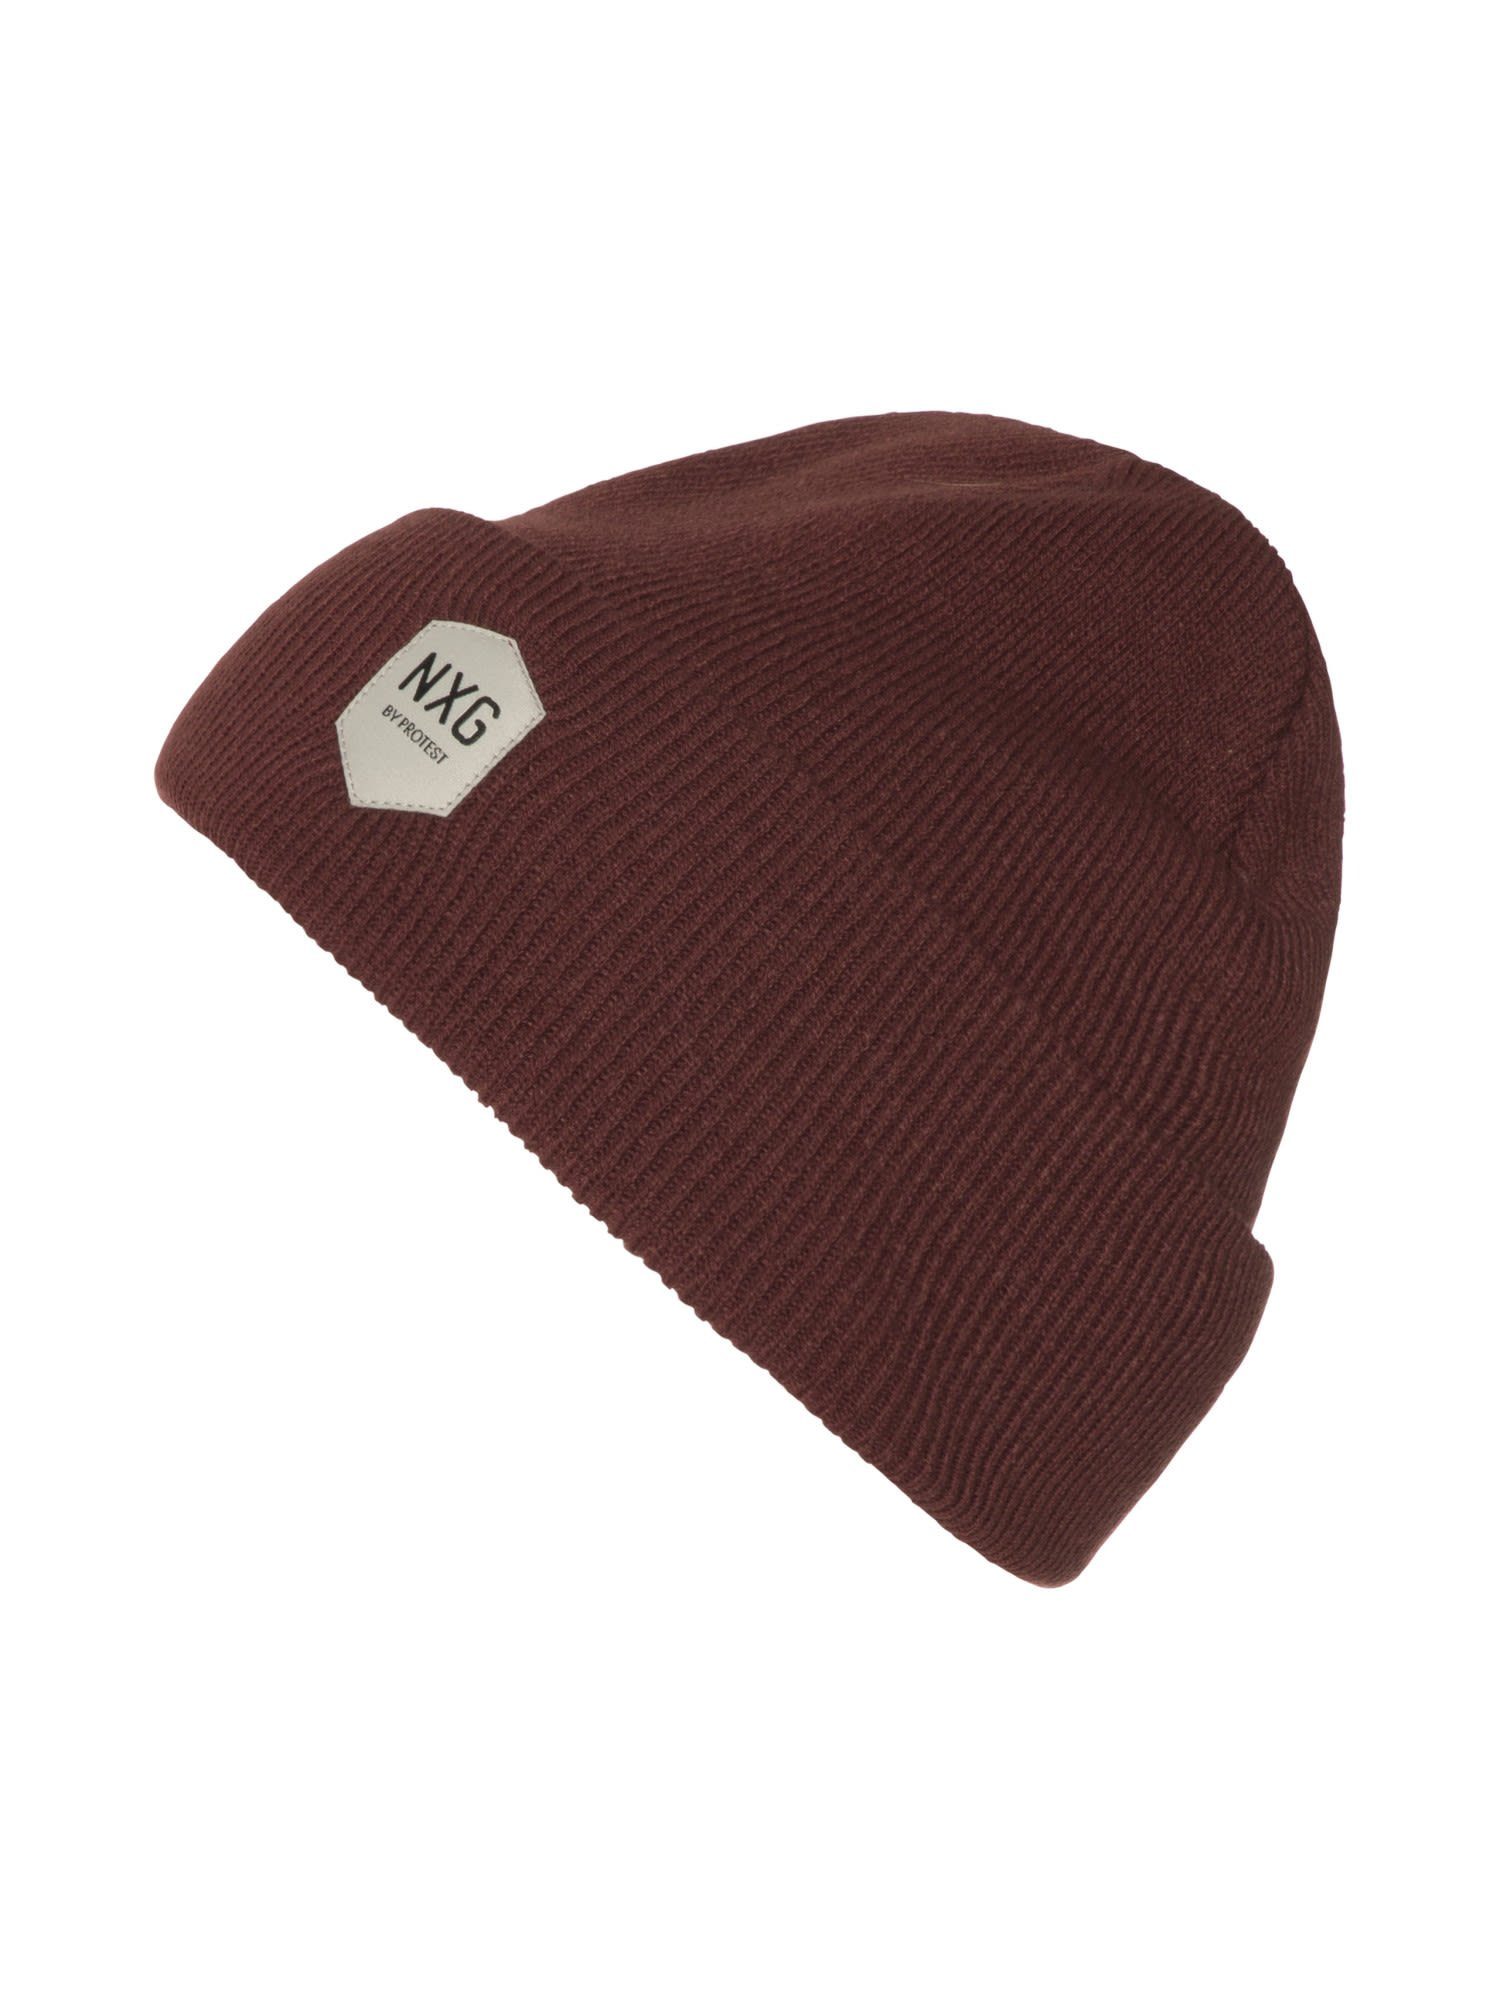 Beanie Nxg Accessoires Protest Beanie Oxblood Rebelly Protest